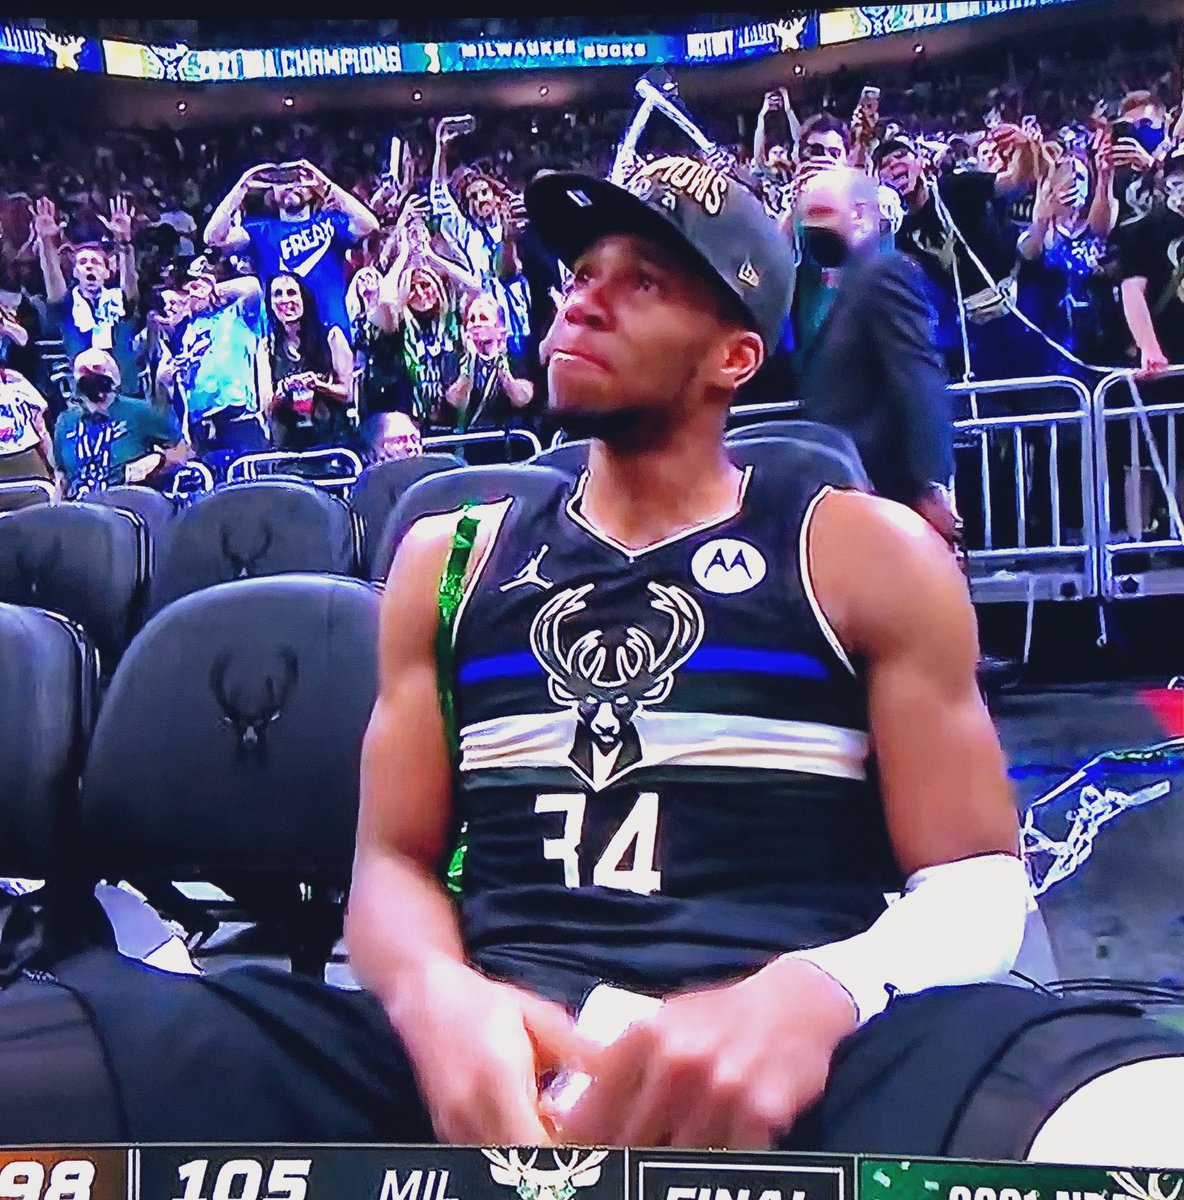 “When you focus on your past, that’s your ego. When you focus on your future, that’s your pride. When you focus on the present, that’s humility.” Giannis, presently an NBA Champion